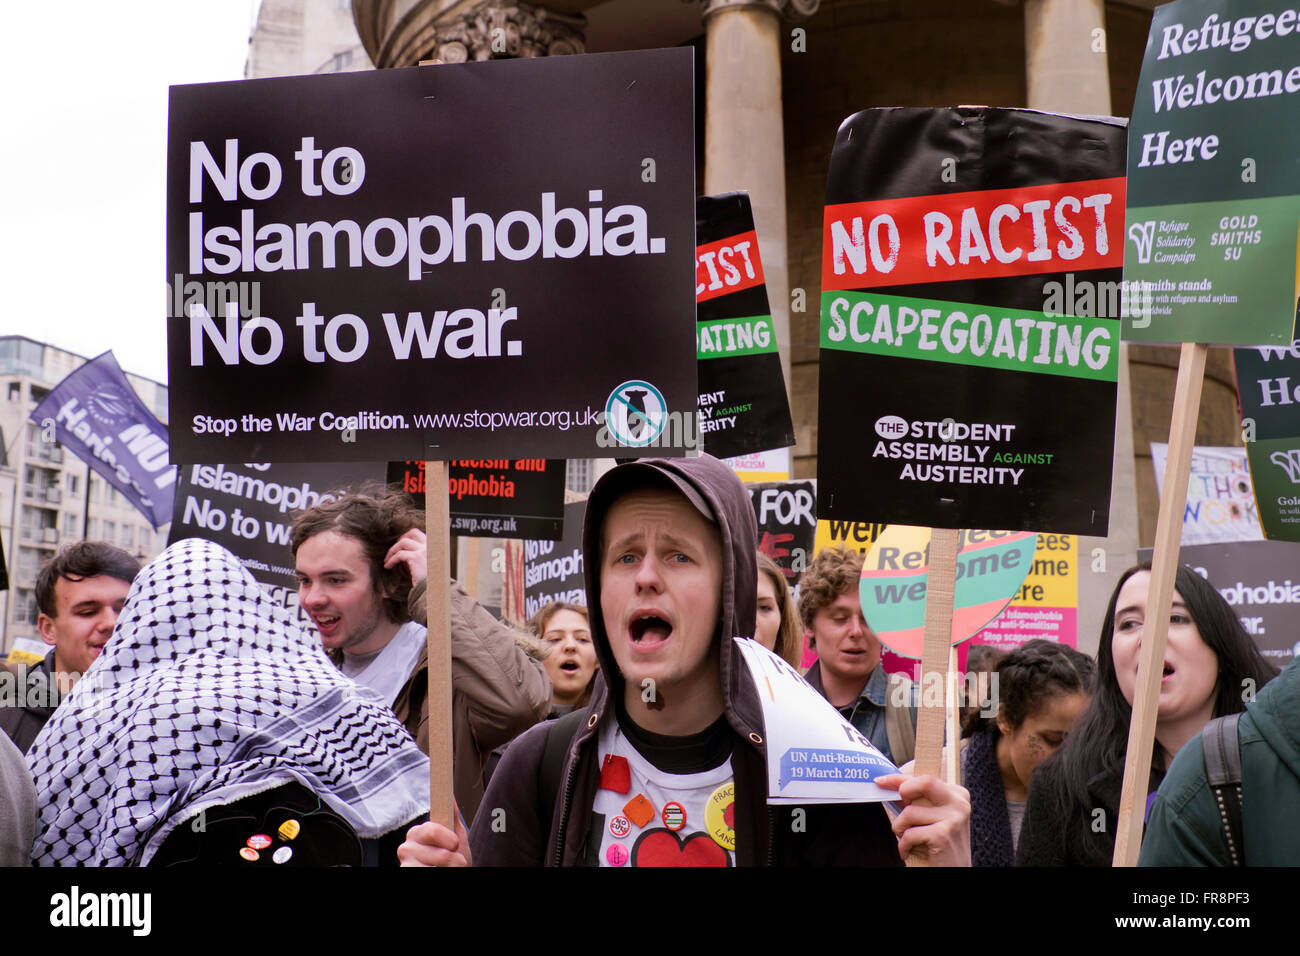 stand-up-to-racism-march-welcoming-refugees-protesting-against-islamophobia-FR8PF3.jpg